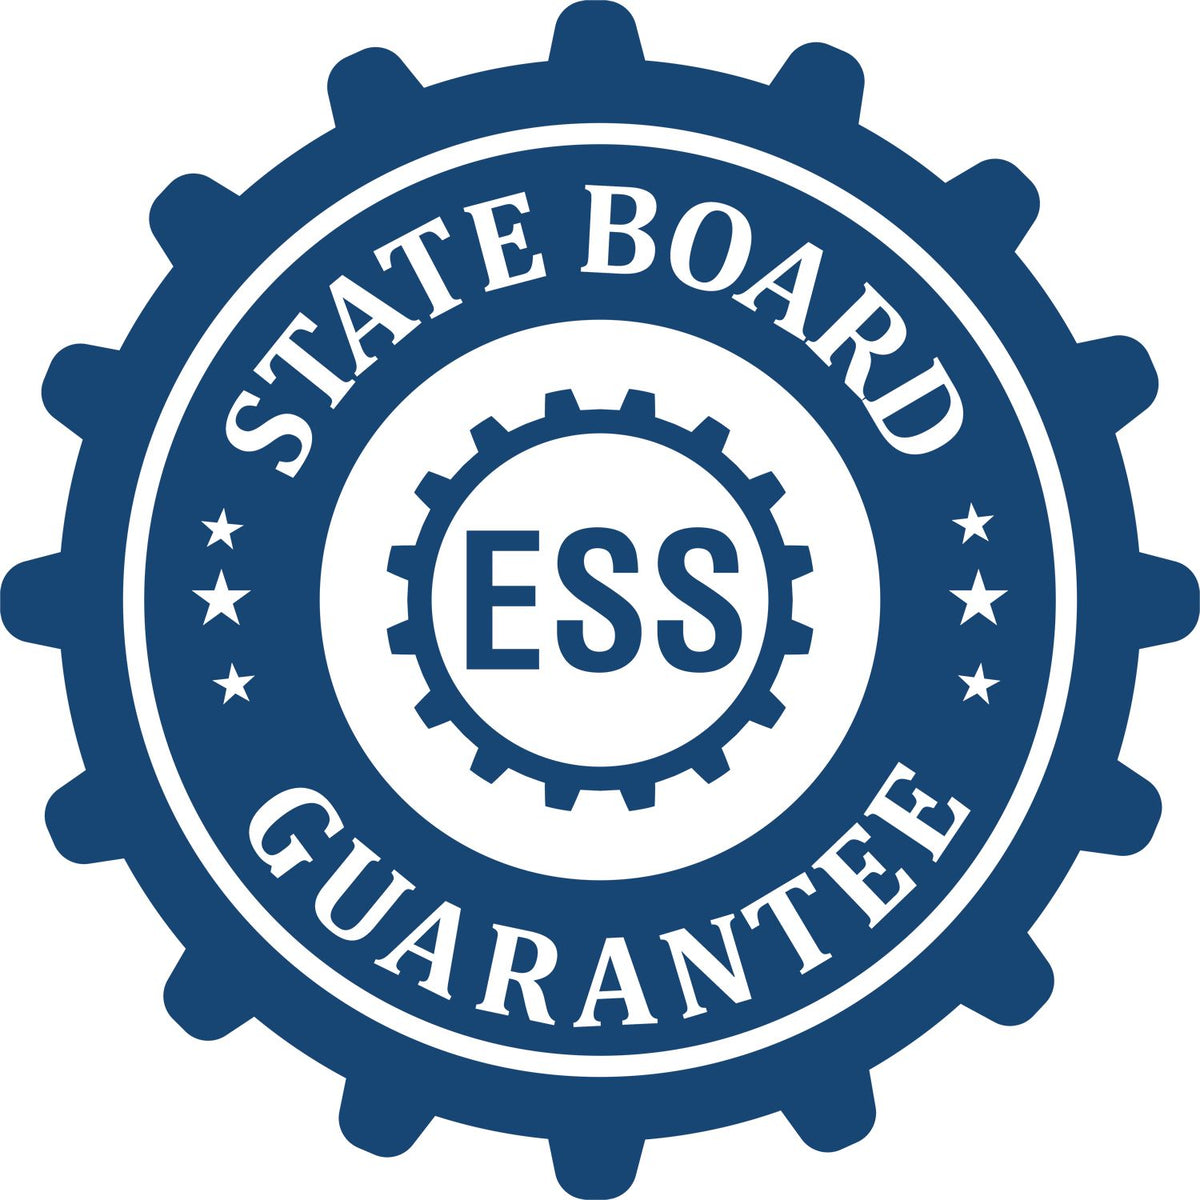 An emblem in a gear shape illustrating a state board guarantee for the Premium MaxLight Pre-Inked Kansas Landscape Architectural Stamp product.